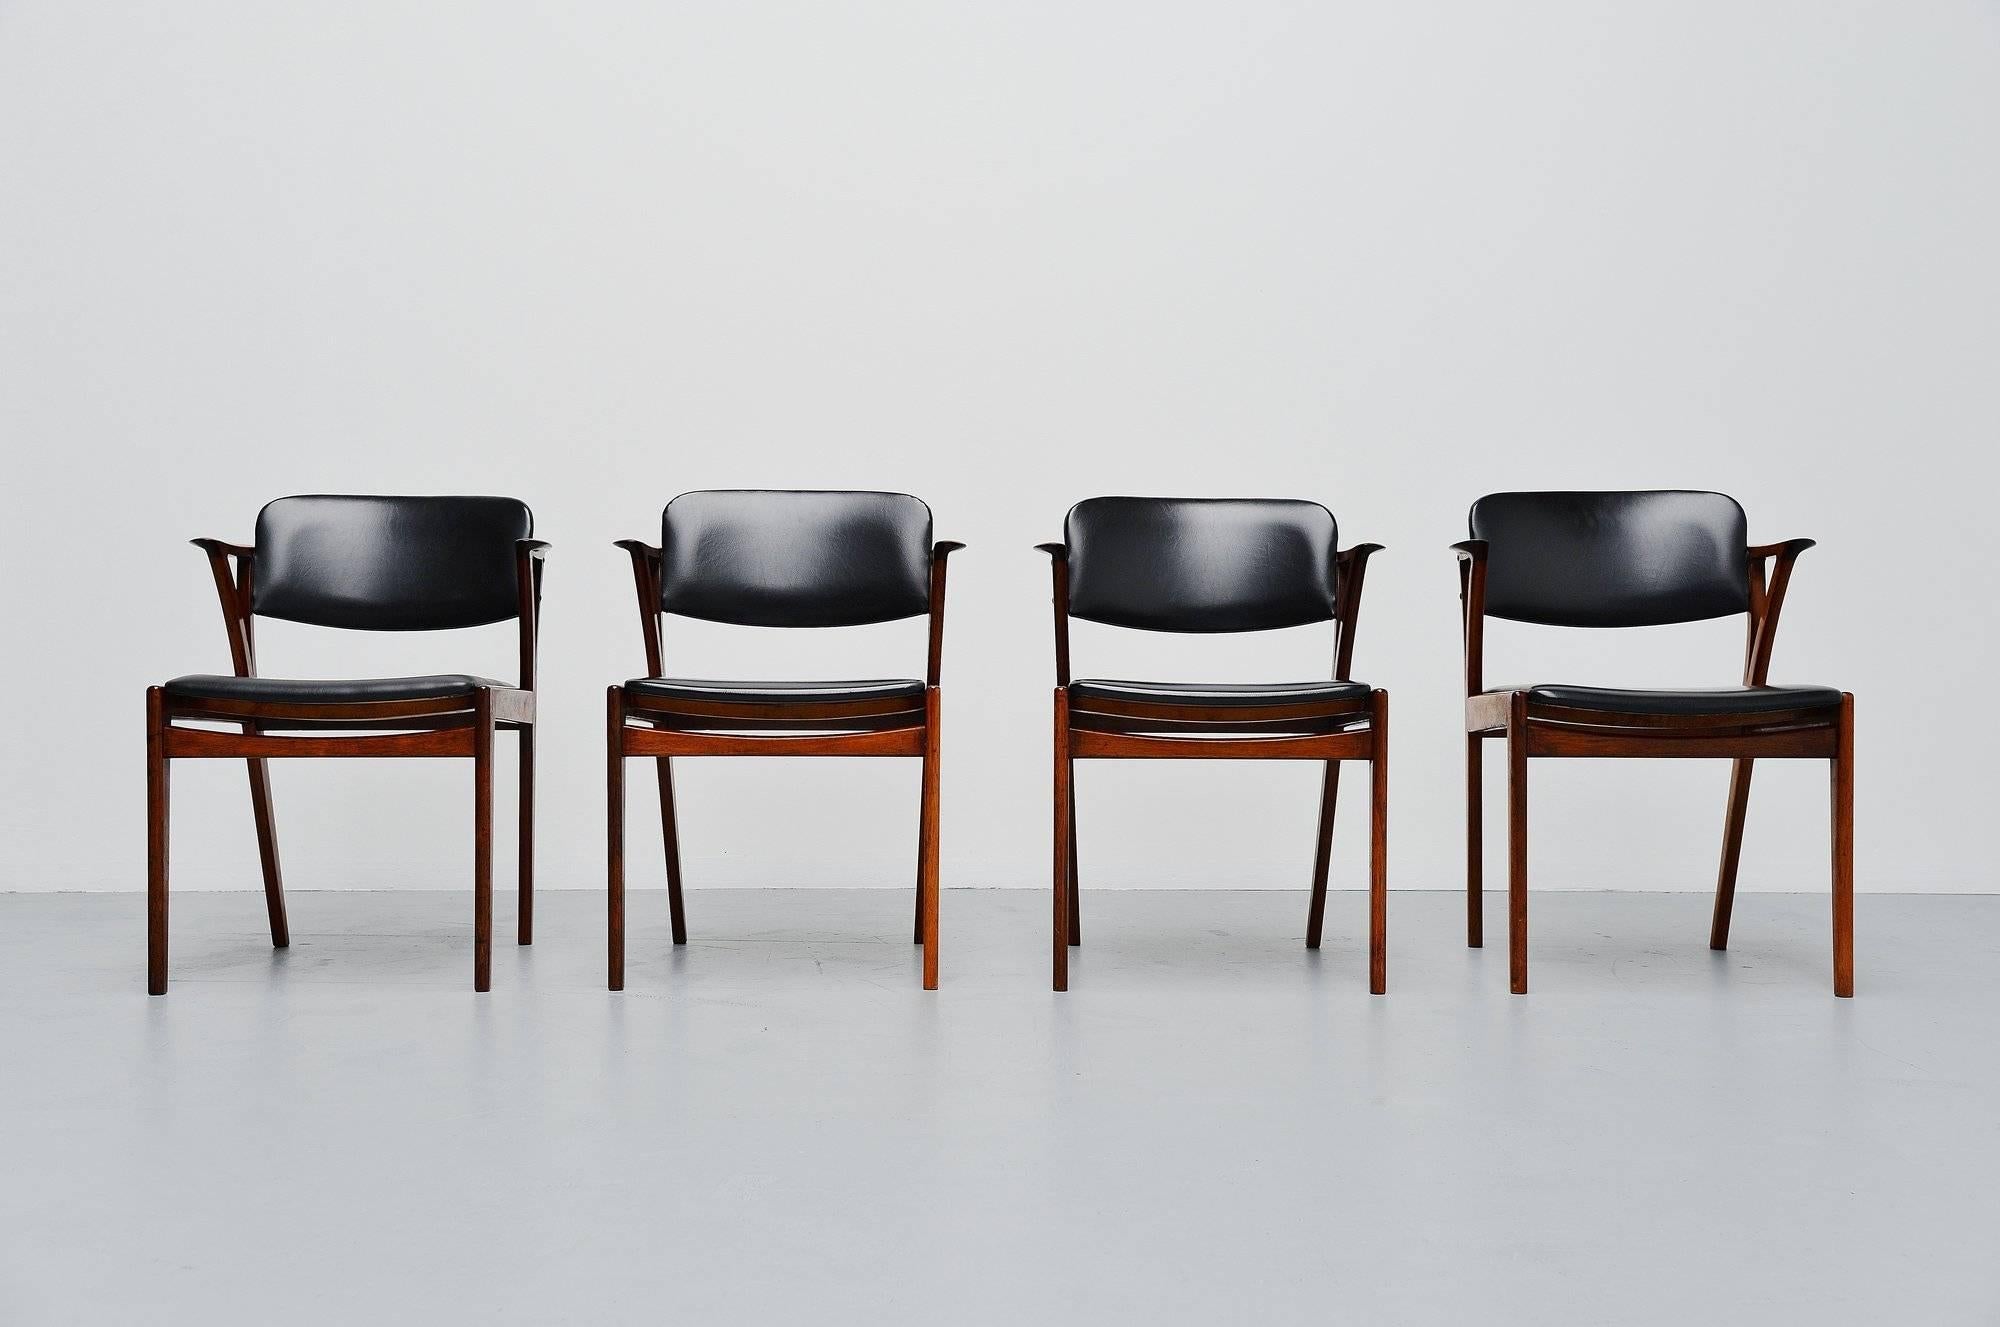 Very nice set of four-arm chairs designed by Kai Kristiansen and manufactured by Bovenkamp furniture, Holland 1960. The chairs have a solid rosewood frame and black faux leather upholstery. The chairs have a very nice and refined shape, the short